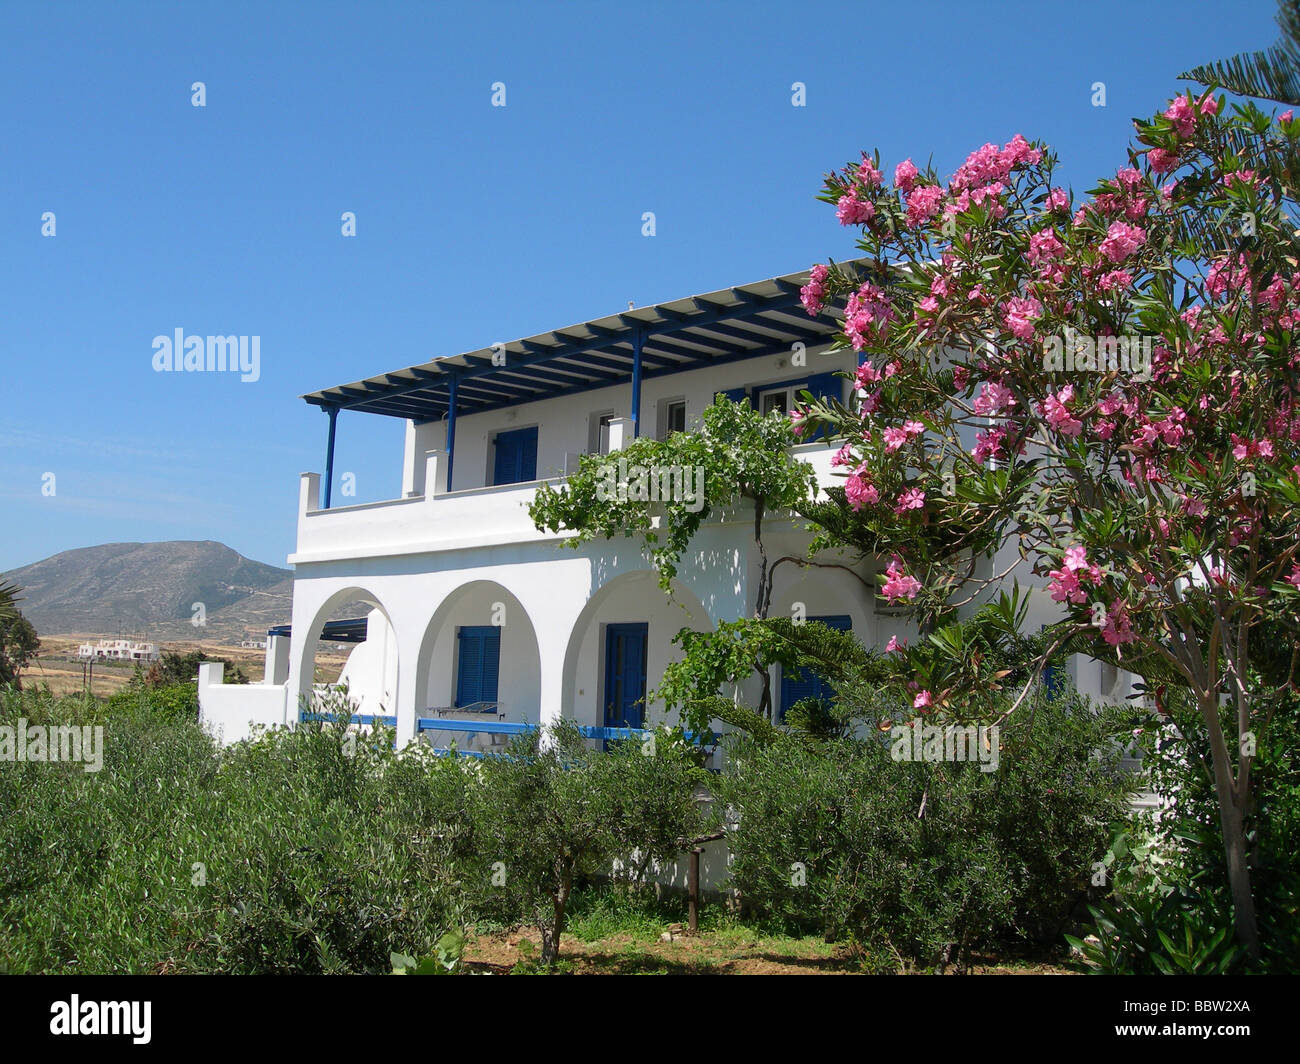 greece greek islands architecture cyclades greek island whitewashed building construction generic blue shutters stucco white flo Stock Photo